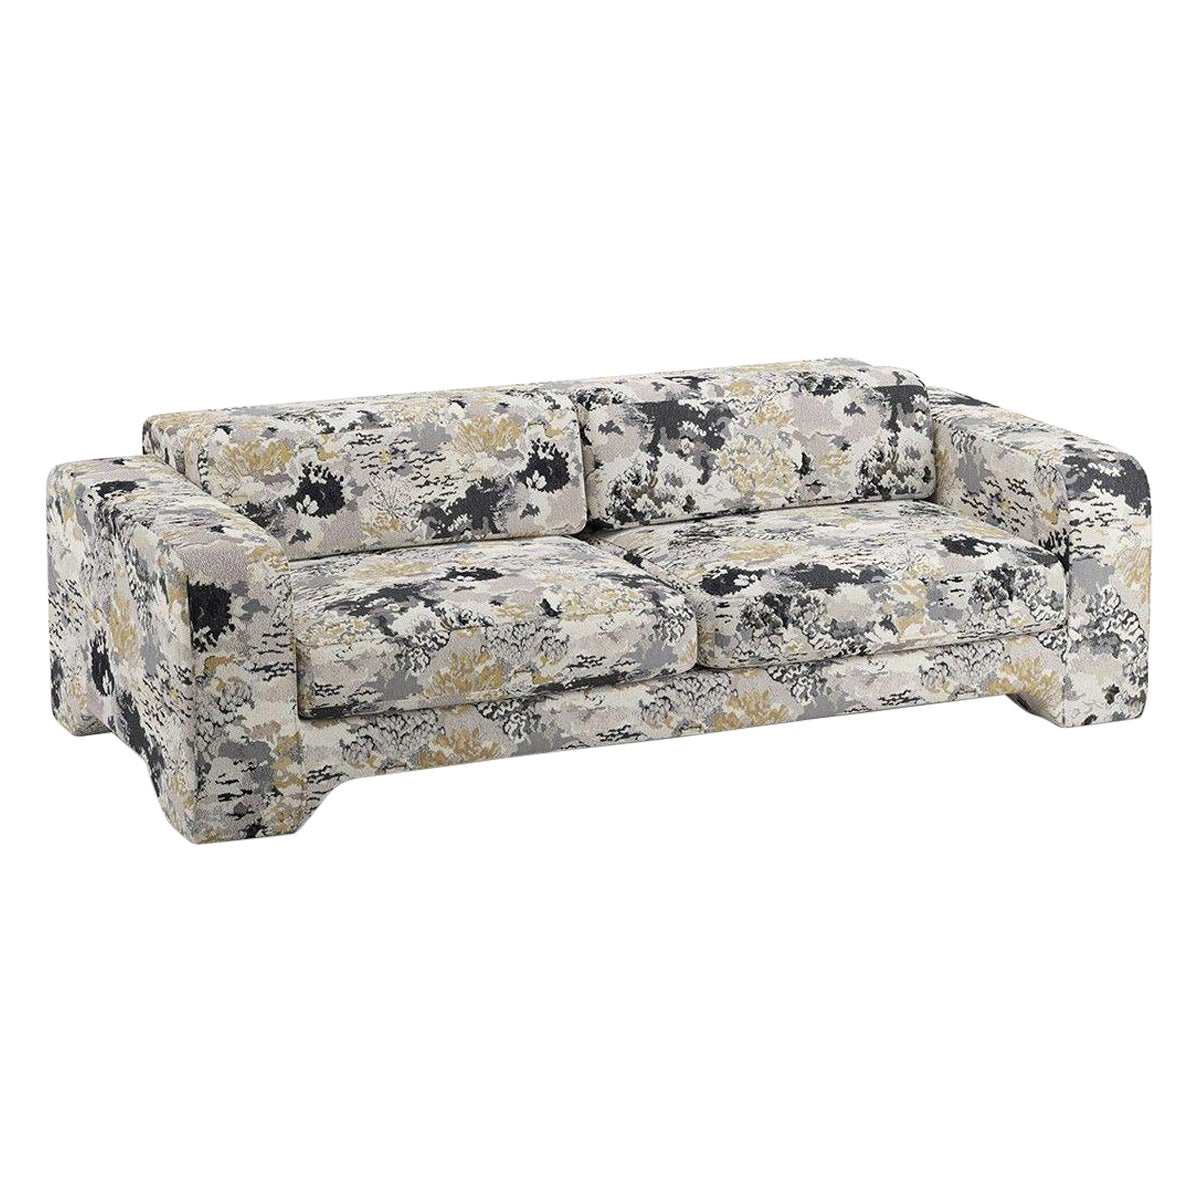 Popus Editions Giovanna 4 Seater Sofa in Charcoal Marrakech Jacquard Fabric For Sale